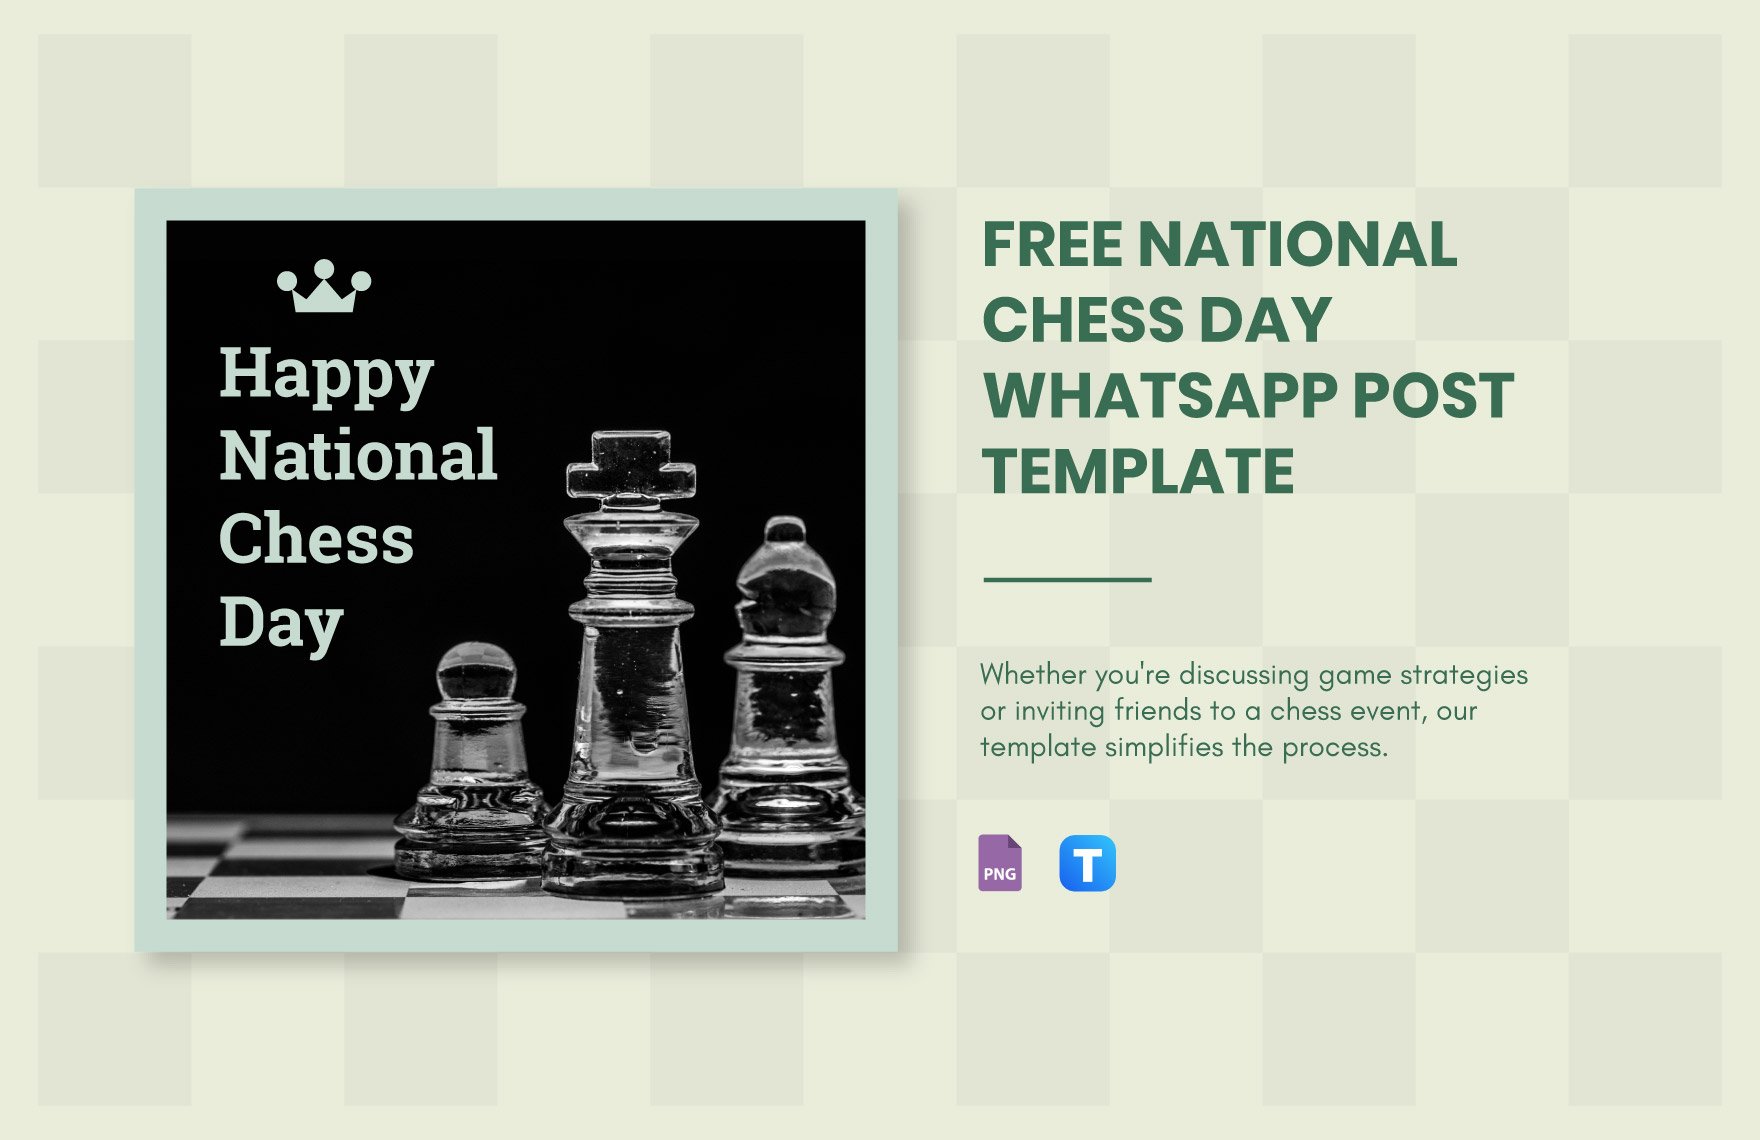 Free National Chess Day WhatsApp Post Template in PNG